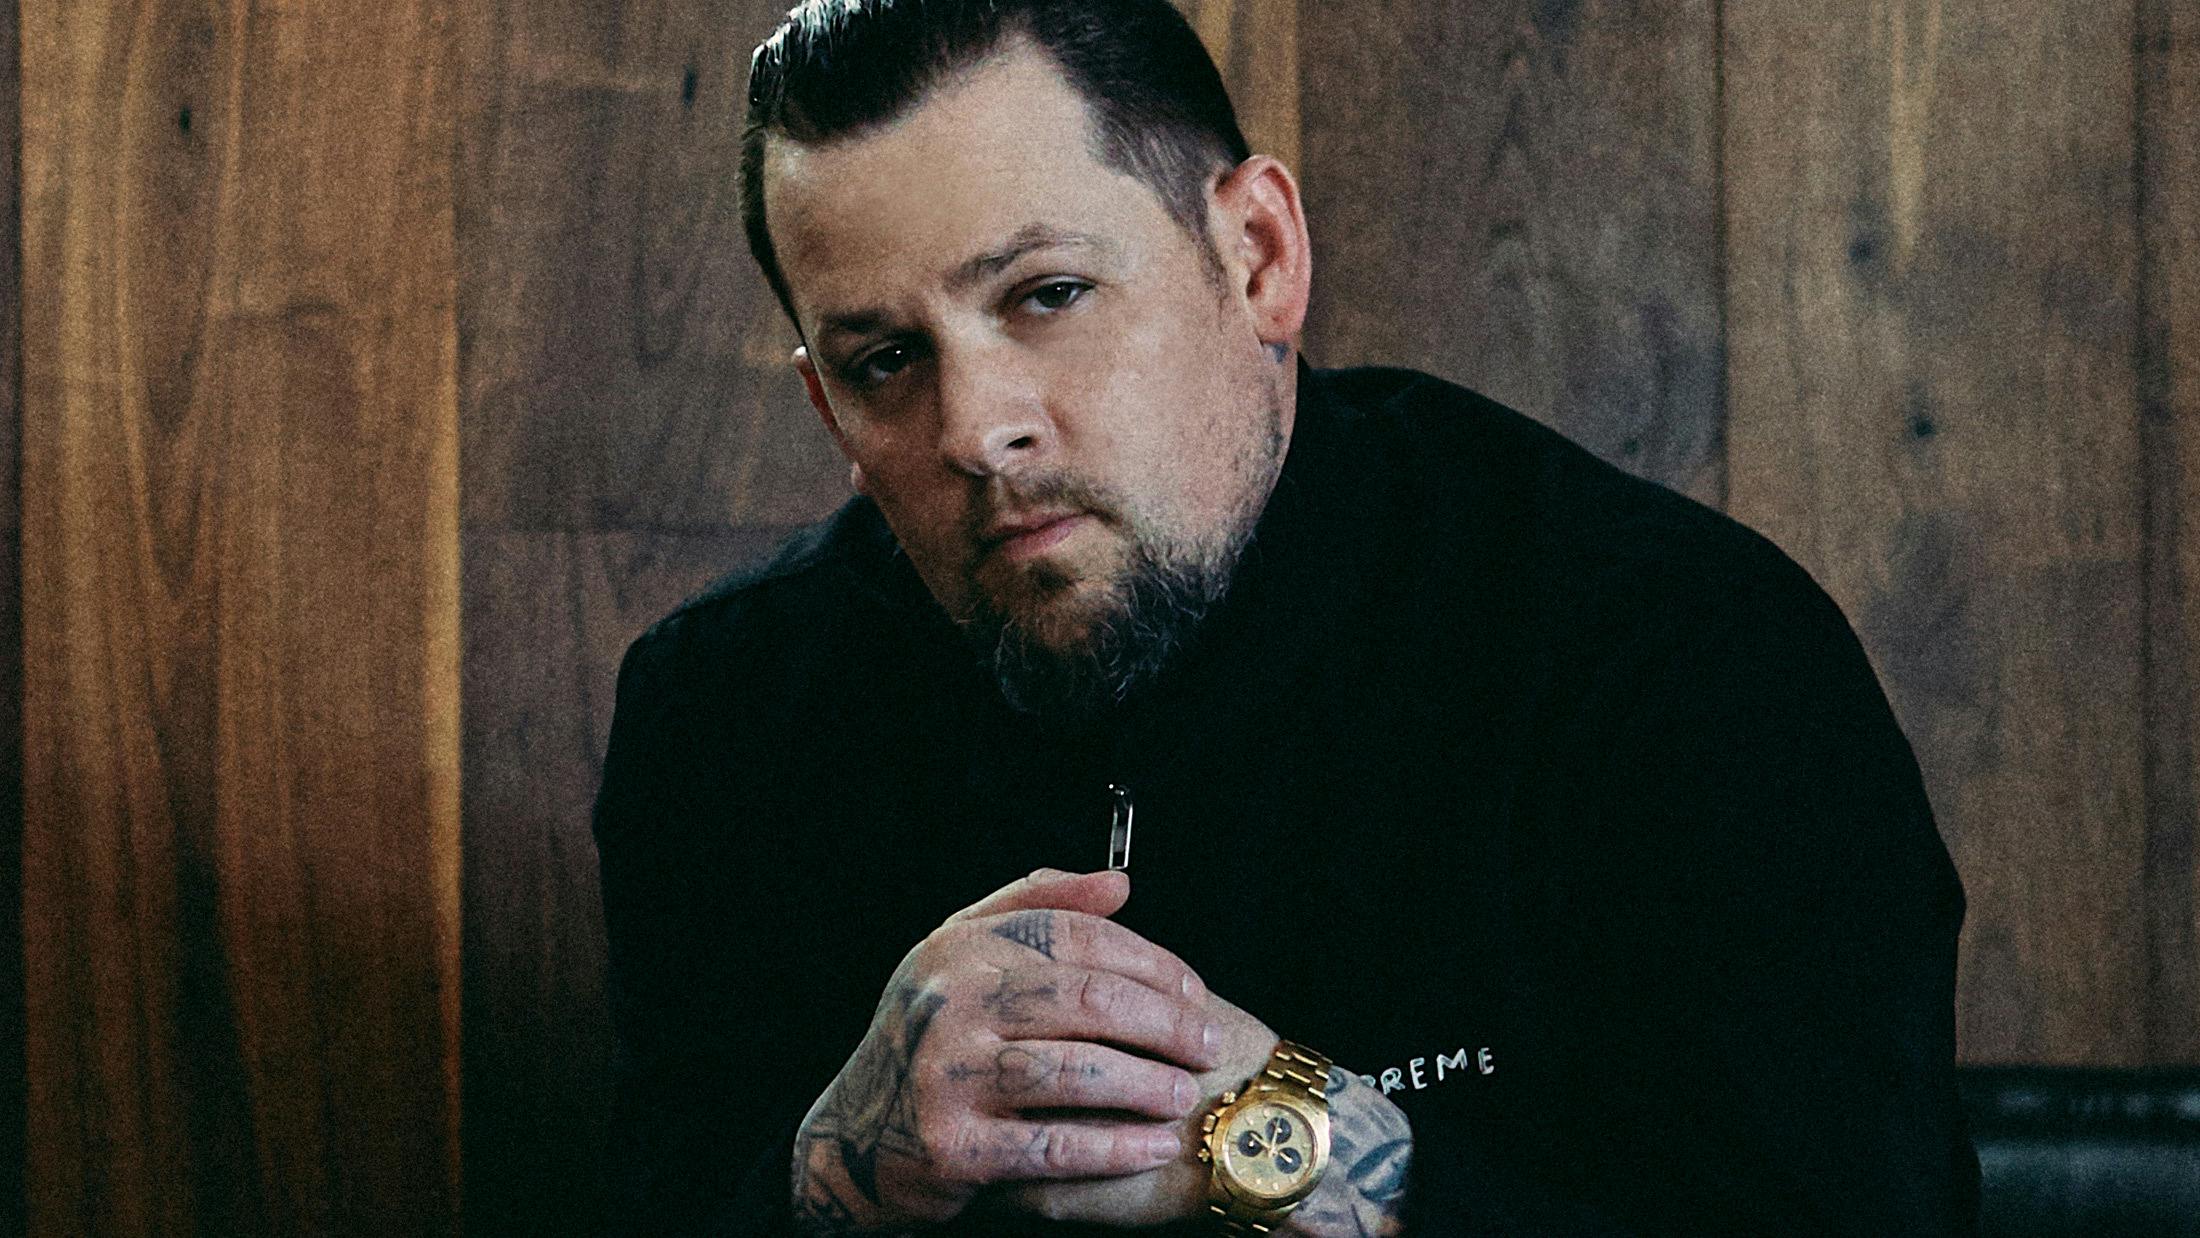 Good Charlotte’s Joel Madden: “Work hard, be nice to people, be honest and believe in yourself”